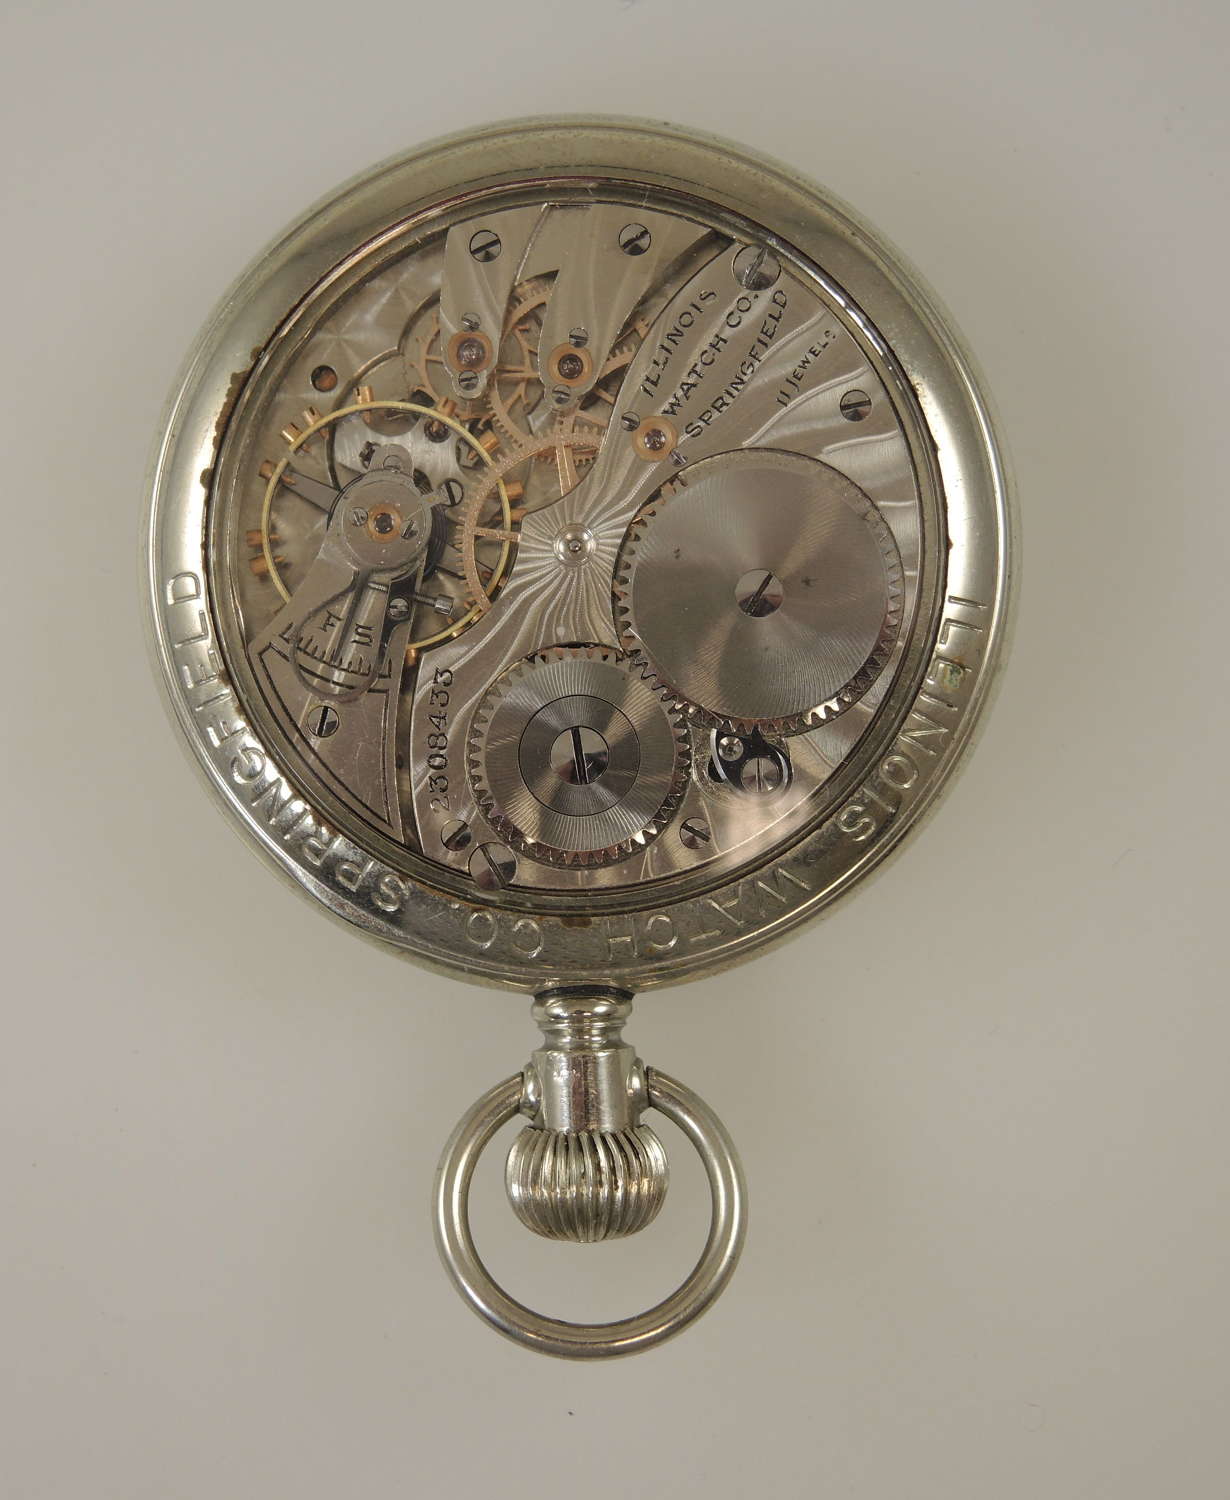 Vintage pocket watch by Illinois in a display case c1910